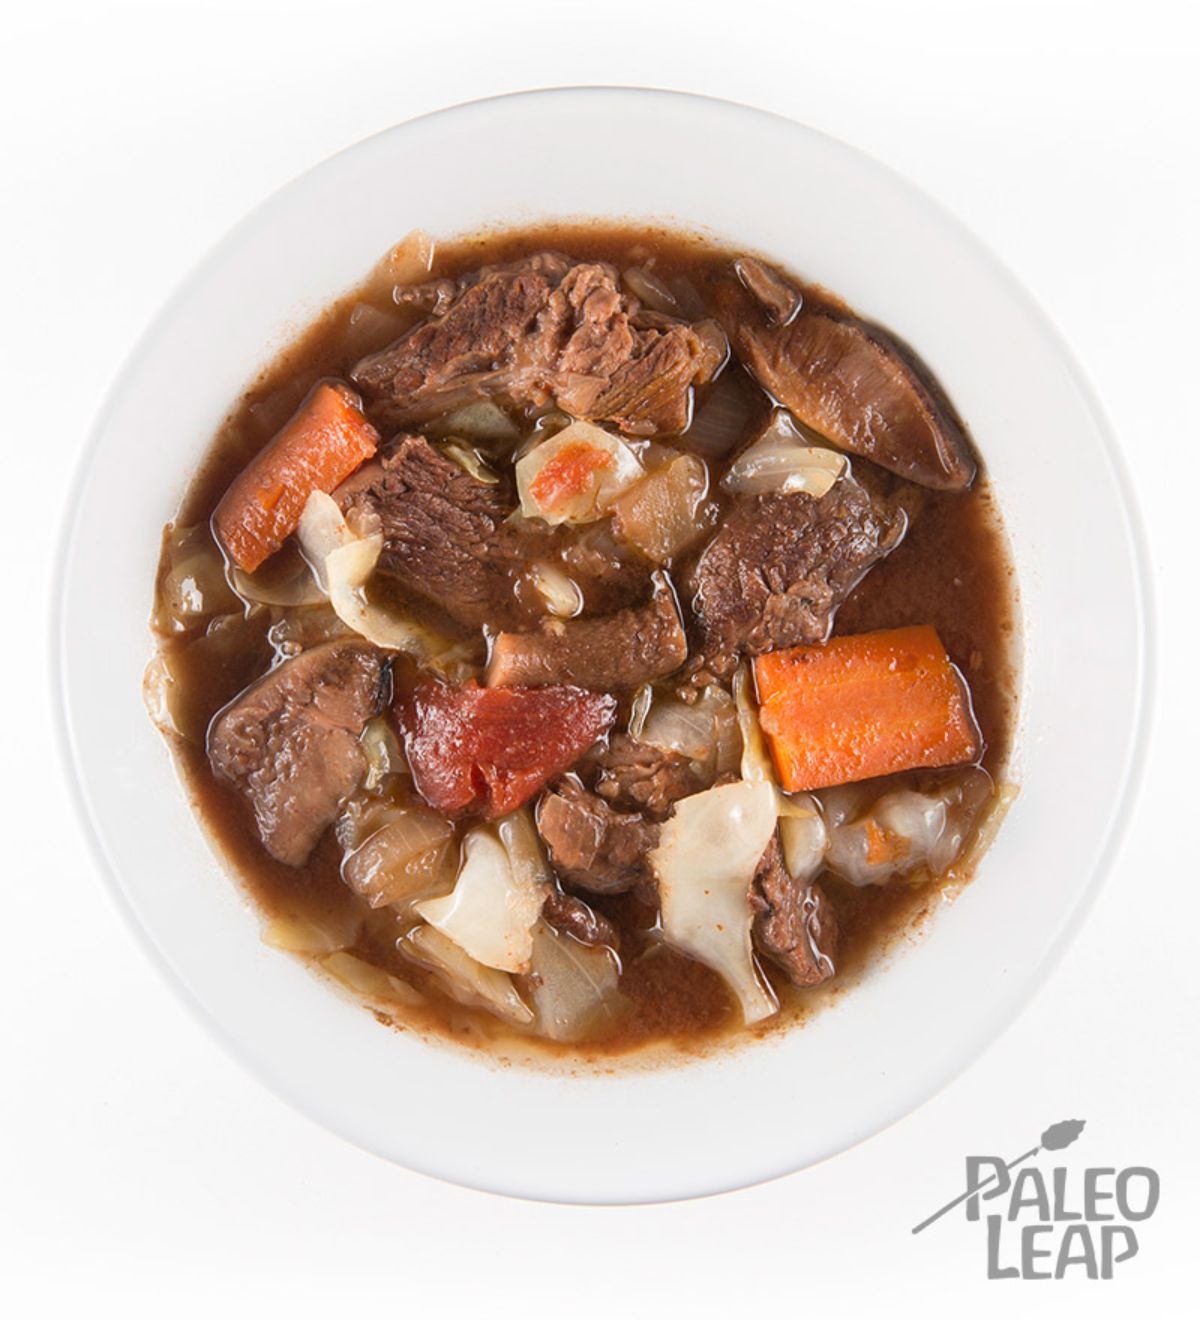 Slow Cooker Paleo Beef Stew on a plate.